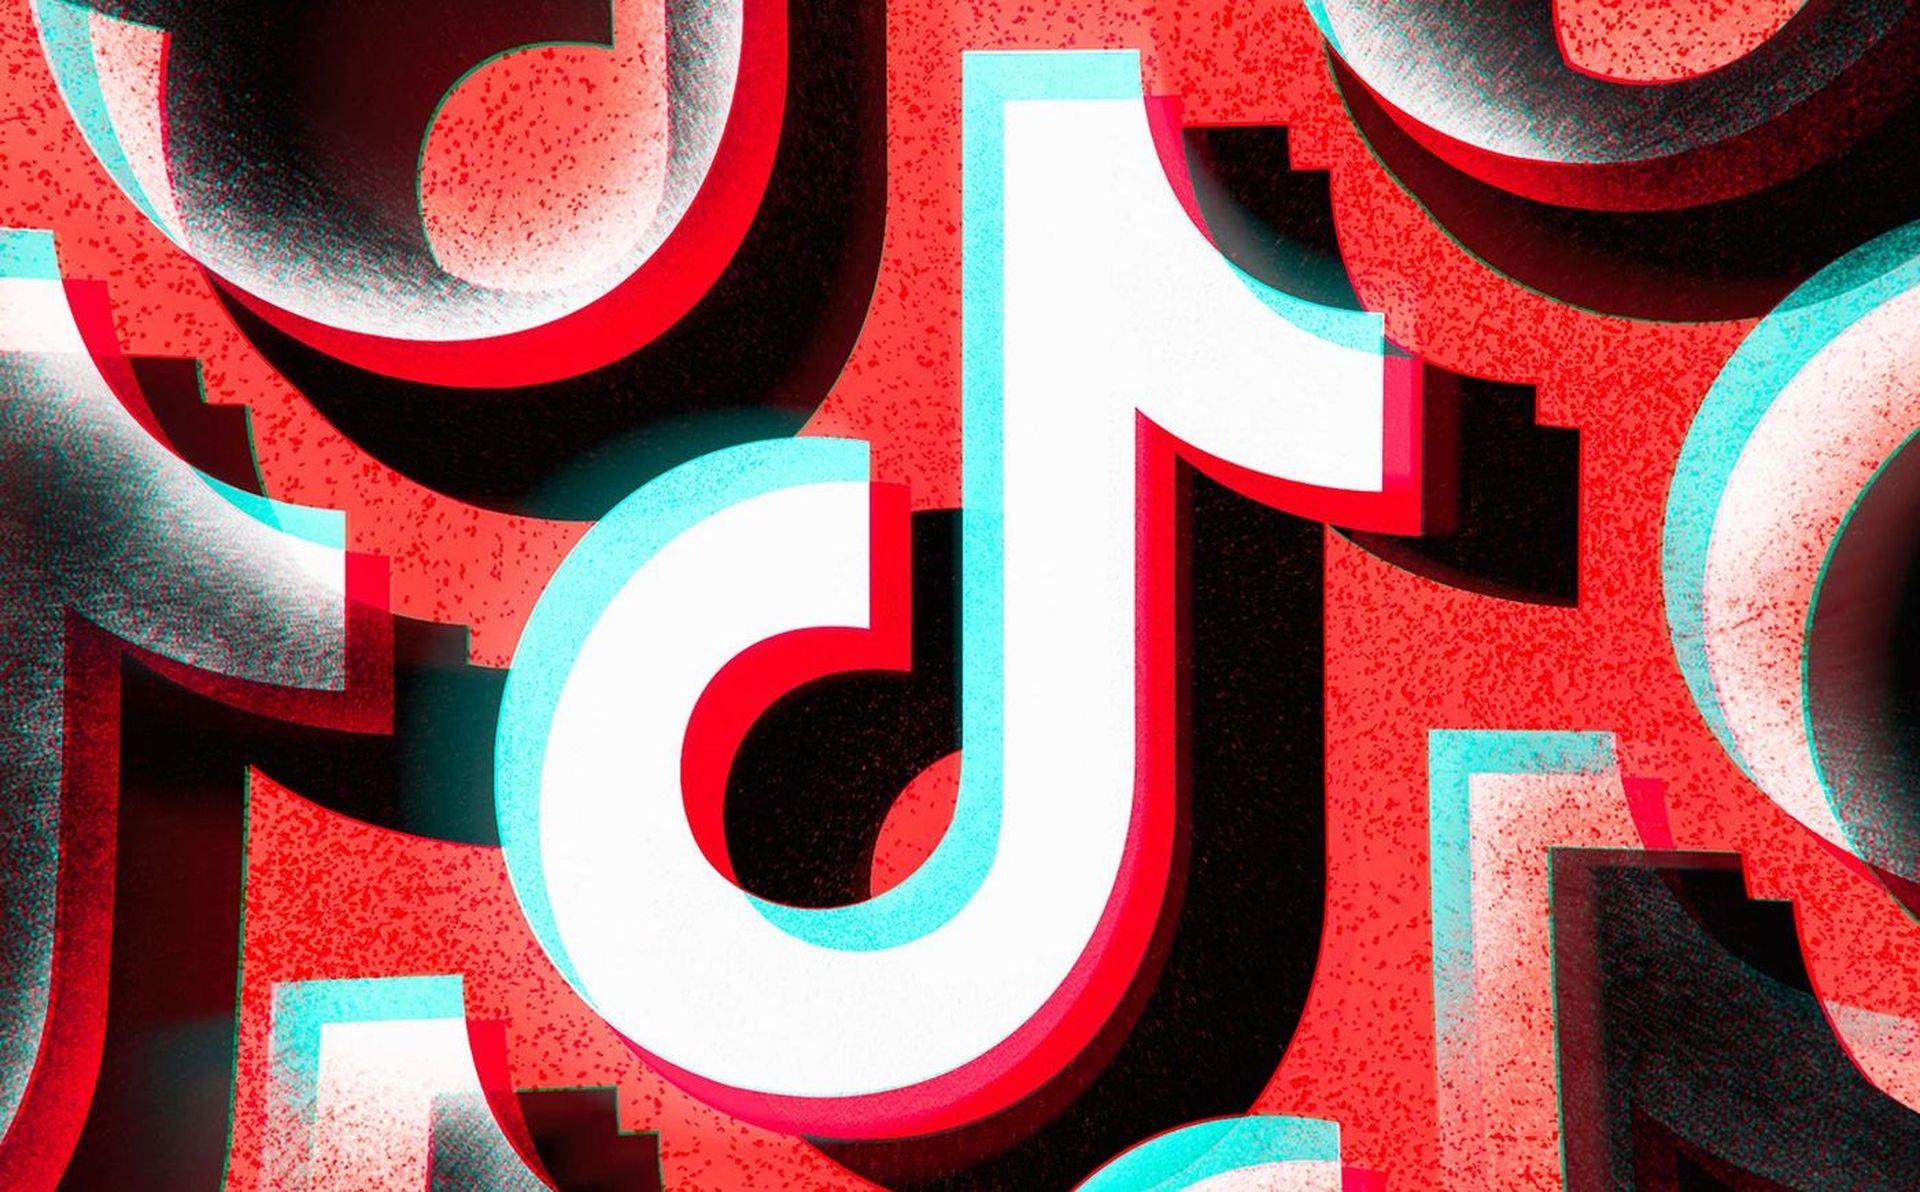 One of the most popular social media apps is facing greater scrutiny over data leaks as a possible TikTok breach of security that could affect over a billion...